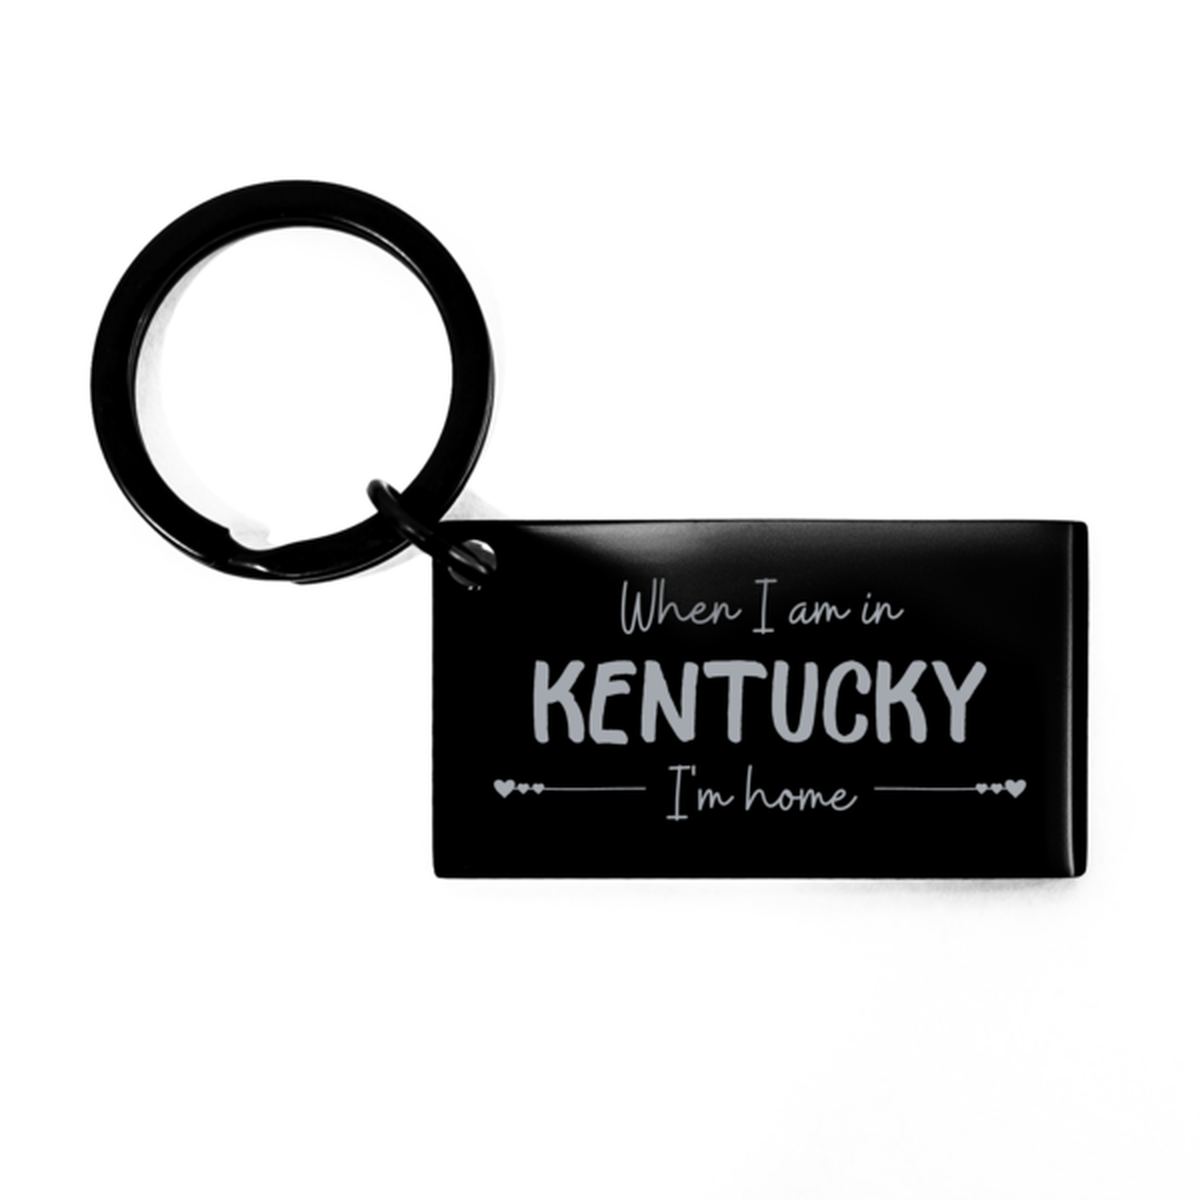 When I am in Kentucky I'm home Keychain, Cheap Gifts For Kentucky, State Kentucky Birthday Gifts for Friends Coworker